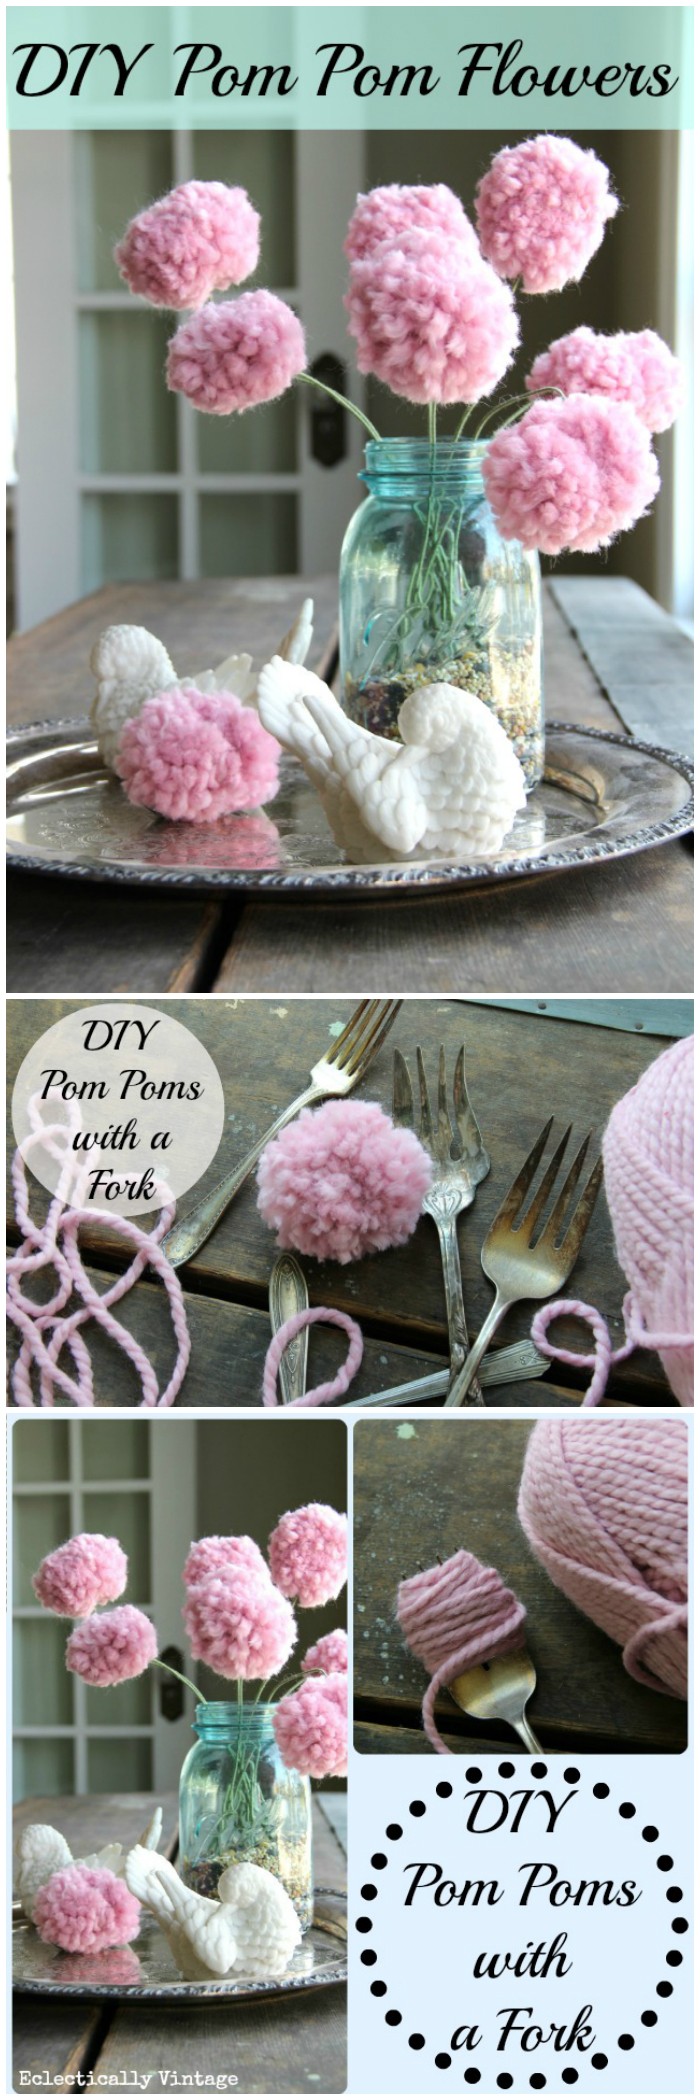 DIY Pom Poms Flowers Cheap DIY Projects For Your Home Decoration